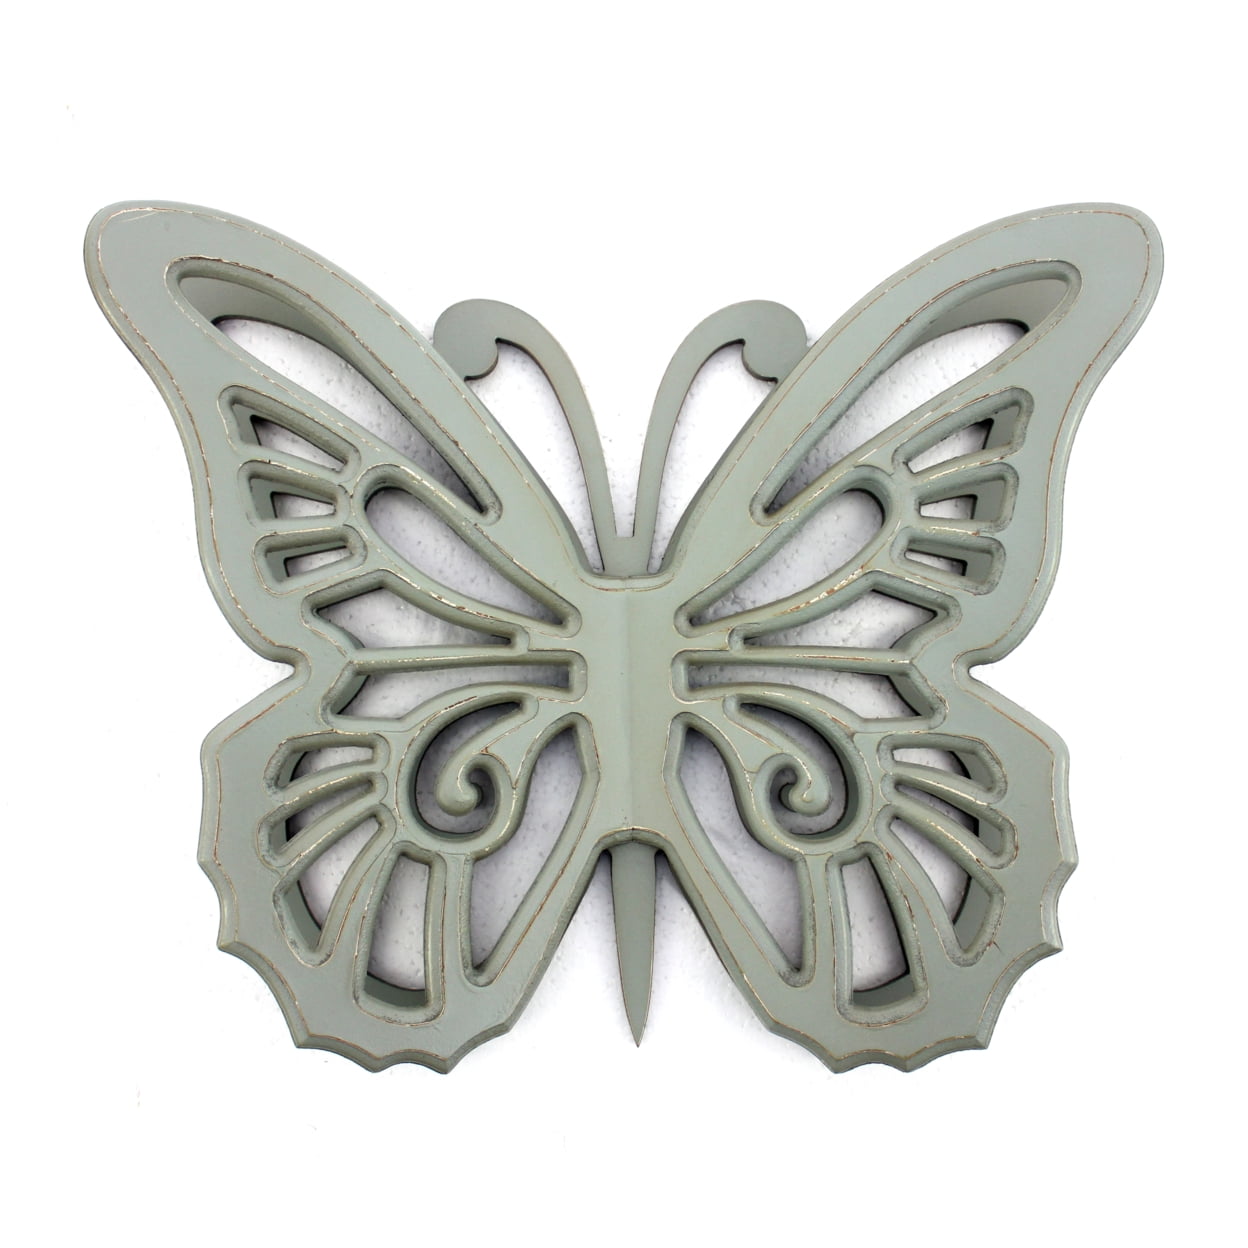 Picture of Benjara BM217270 Wooden Butterfly Wall Plaque with Cutout Detail, Light Gray - 4.25 x 18.5 x 23.25 in.